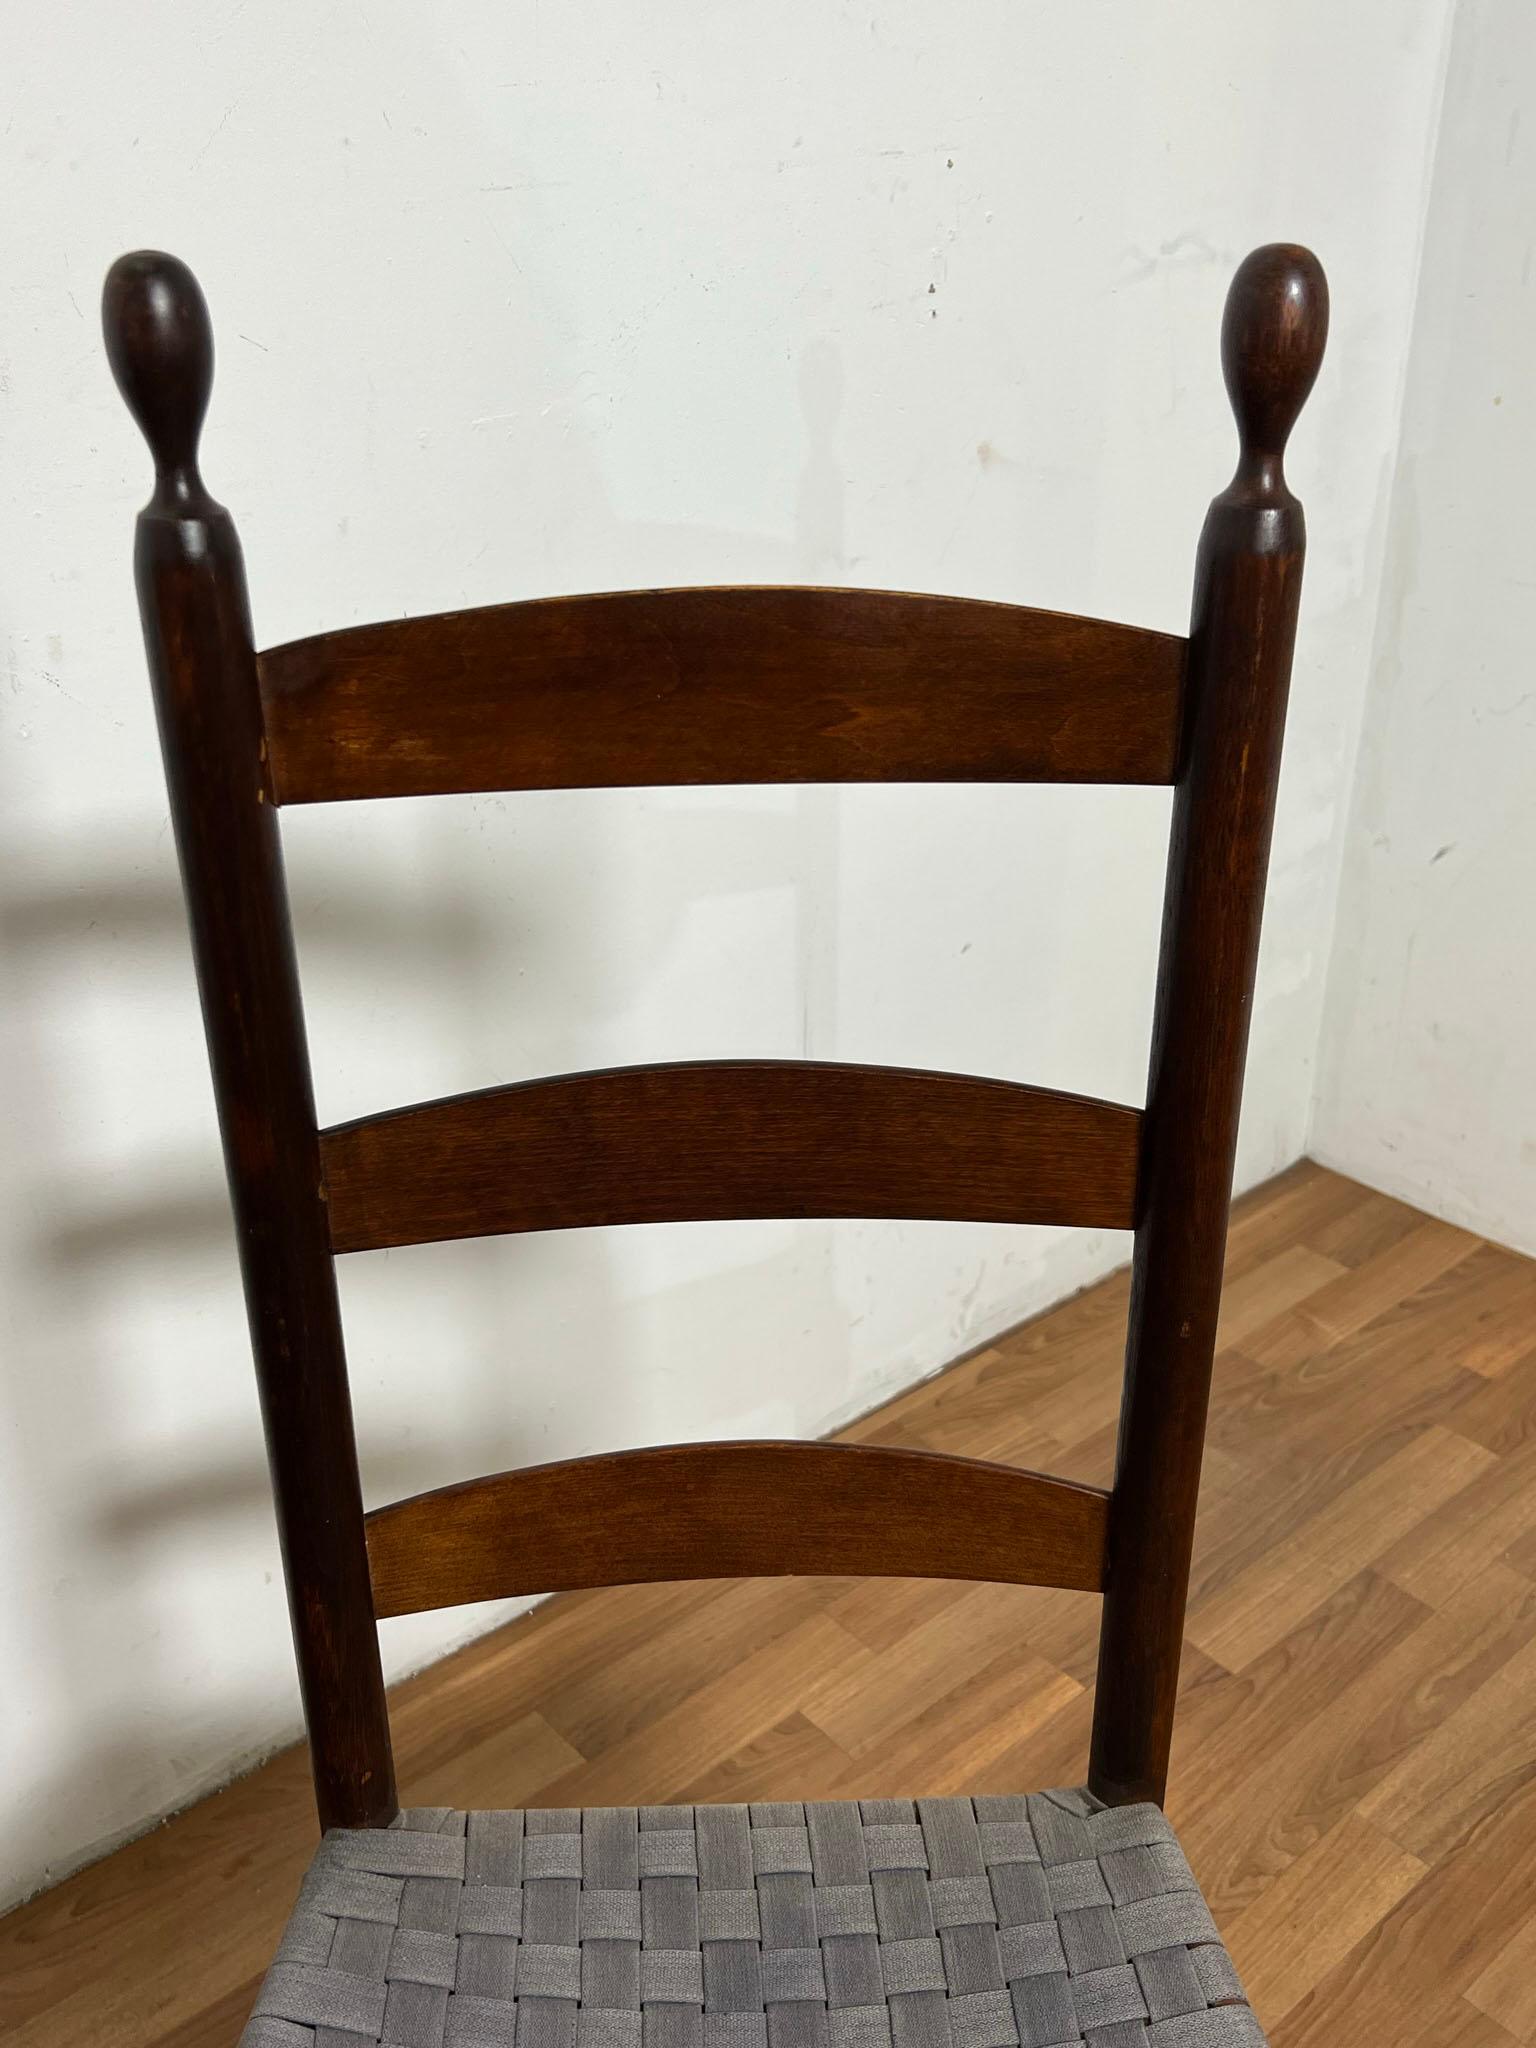 19th Century Pair of Original Shaker Chairs from the Enfield Community, circa Mid 1800s